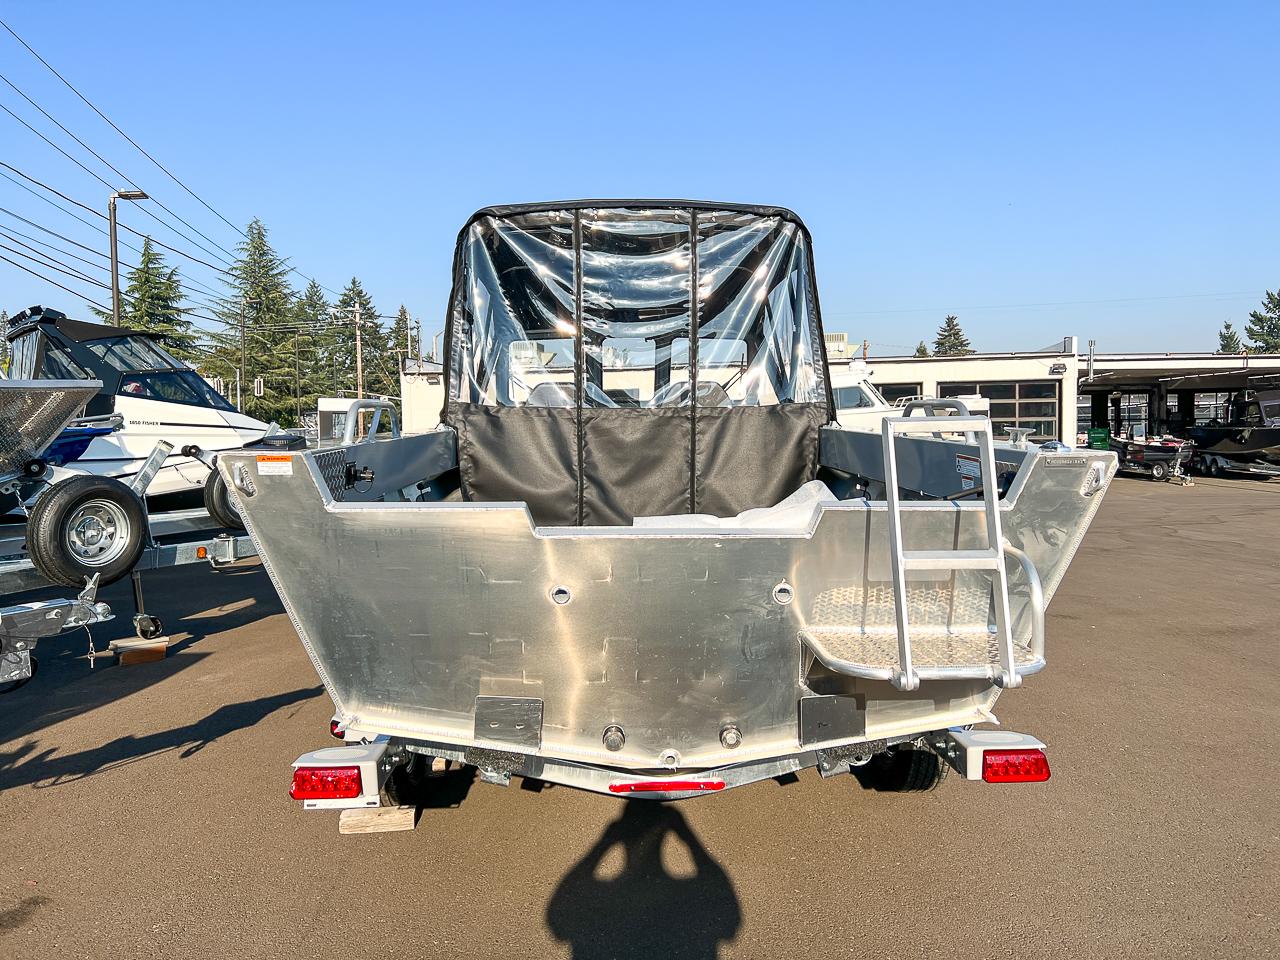 Hewescraft 200 SPORTSMAN - AVAILABLE